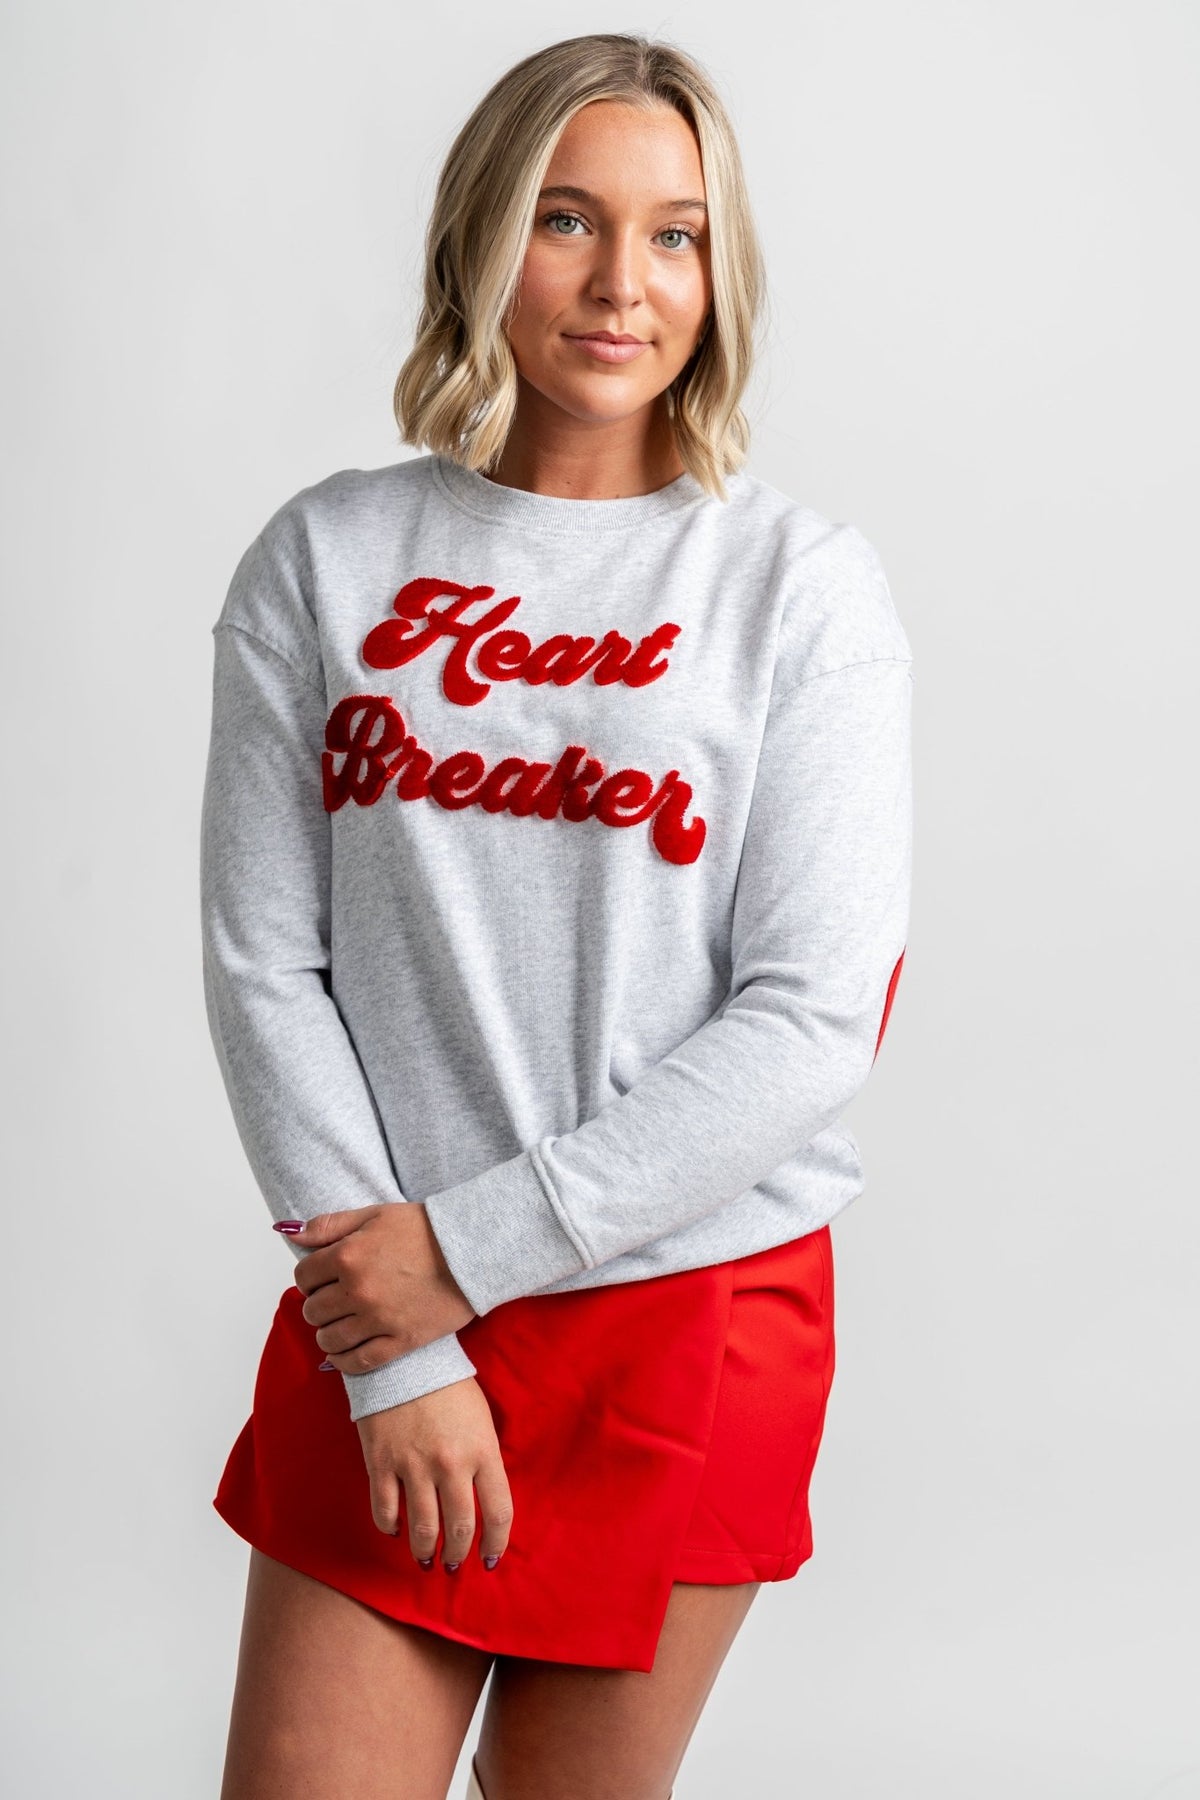 Heart breaker sweatshirt grey - Trendy T-Shirts for Valentine's Day at Lush Fashion Lounge Boutique in Oklahoma City